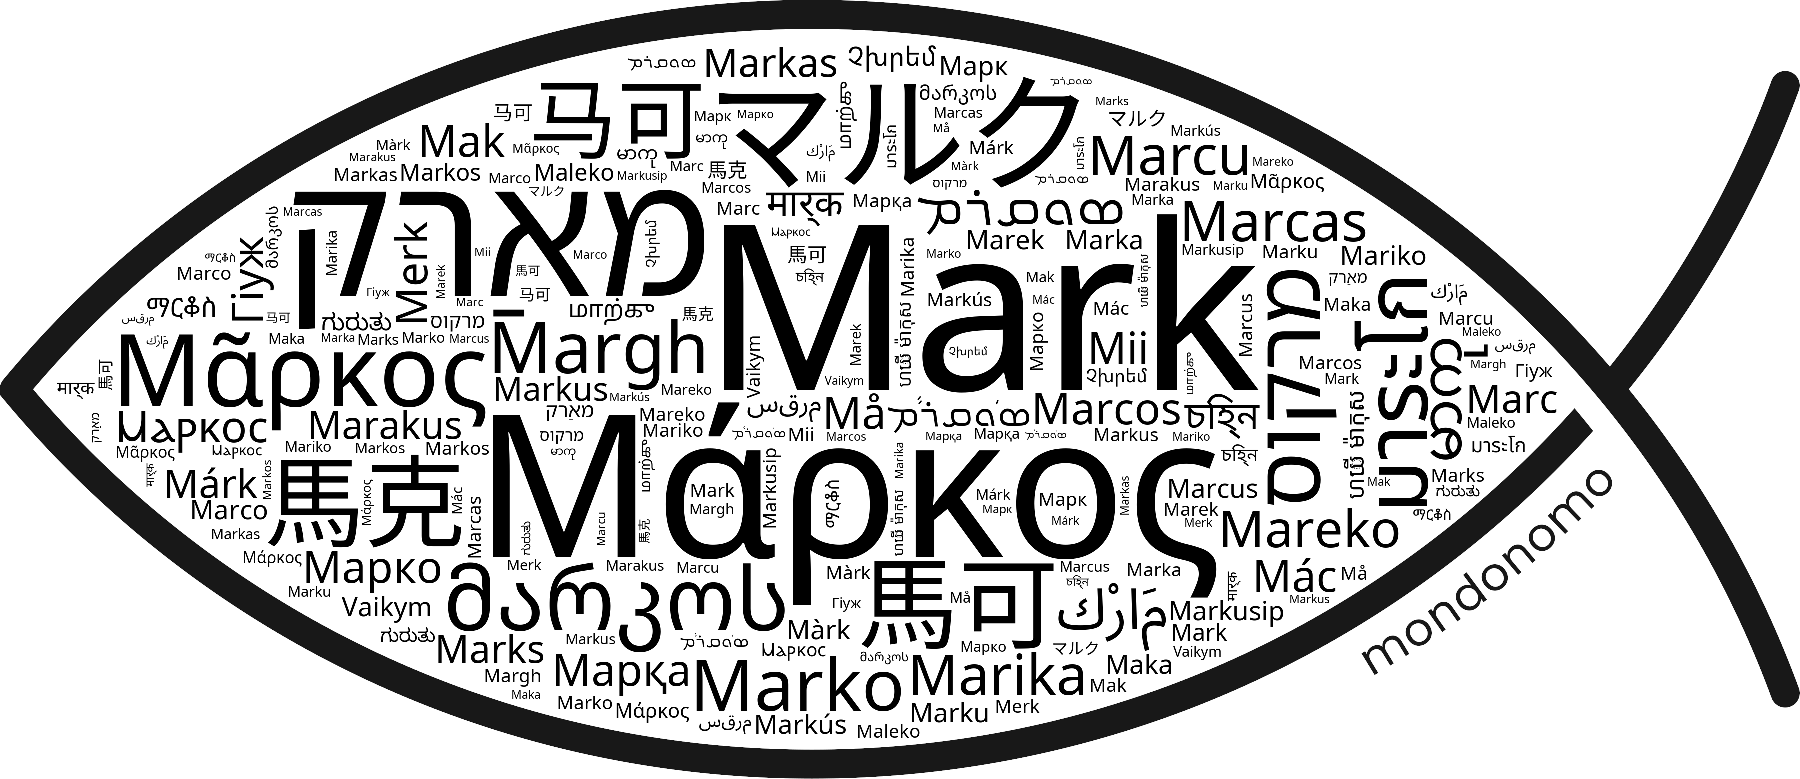 Name Mark in the world's Bibles